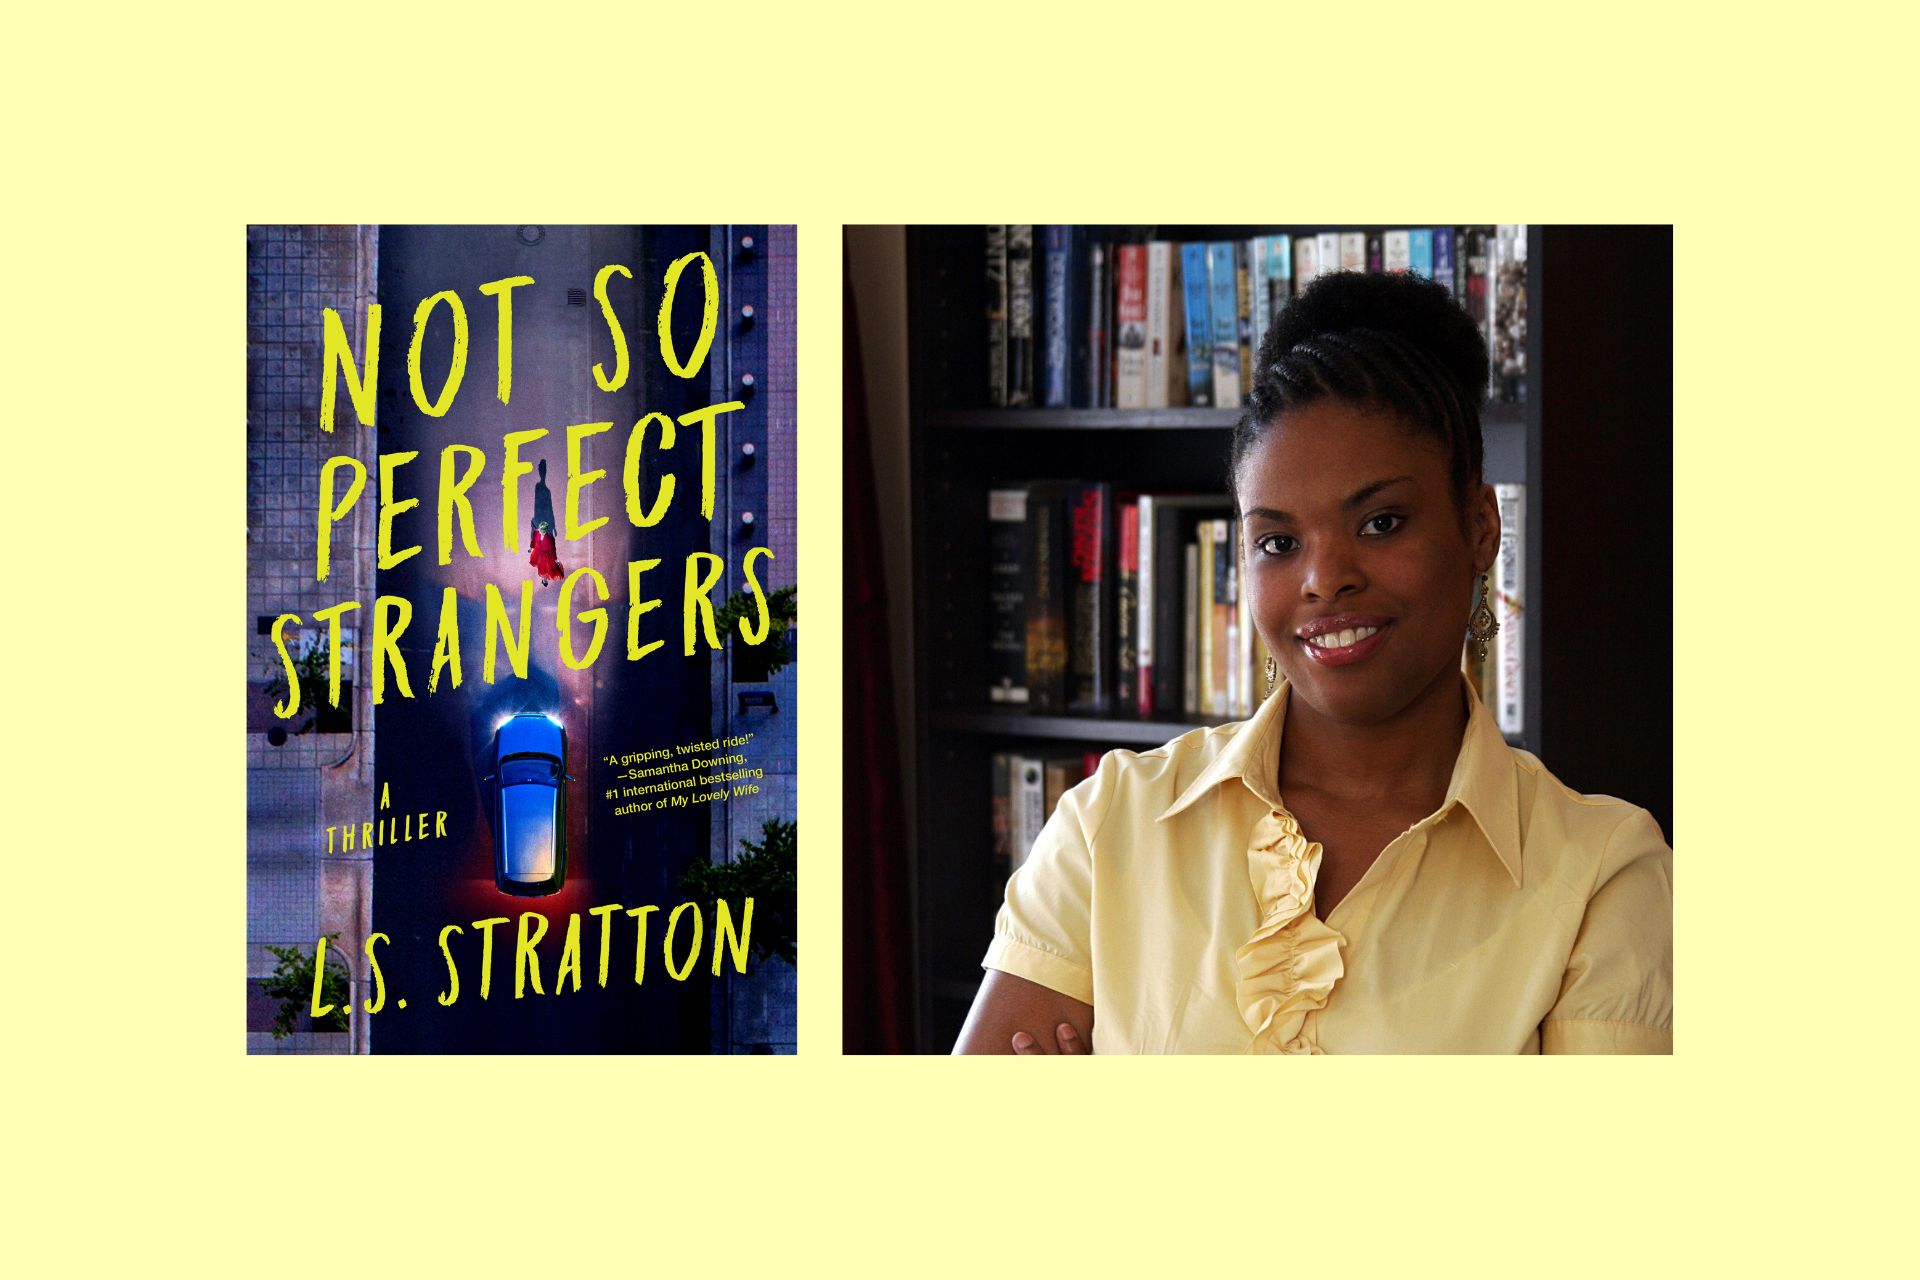 Not So Perfect Strangers book cover and L. S. Stratton headshot